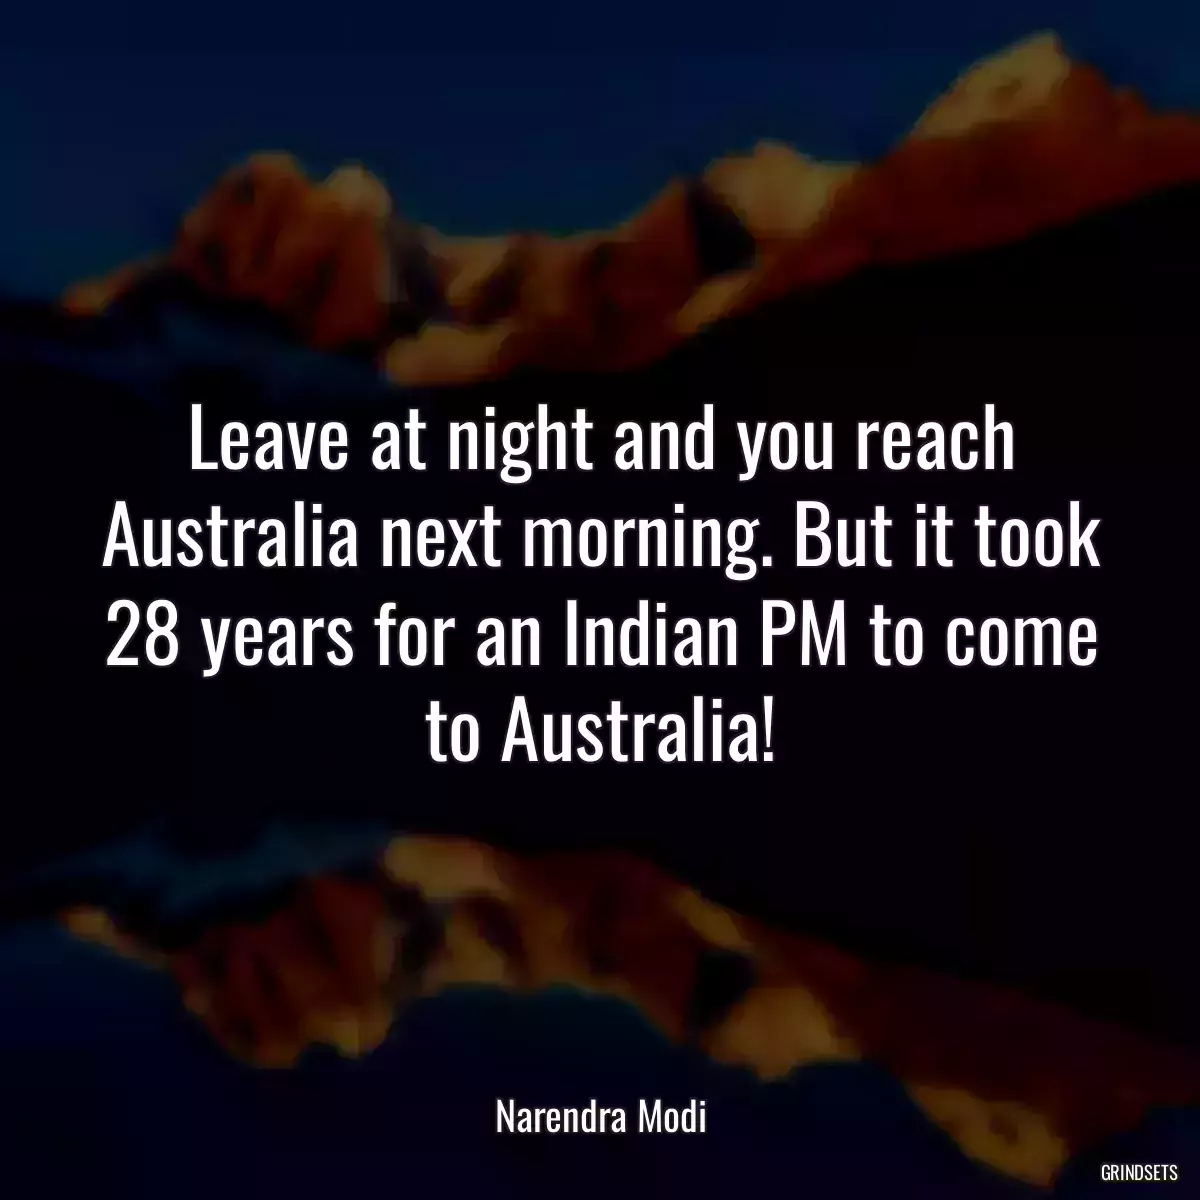 Leave at night and you reach Australia next morning. But it took 28 years for an Indian PM to come to Australia!